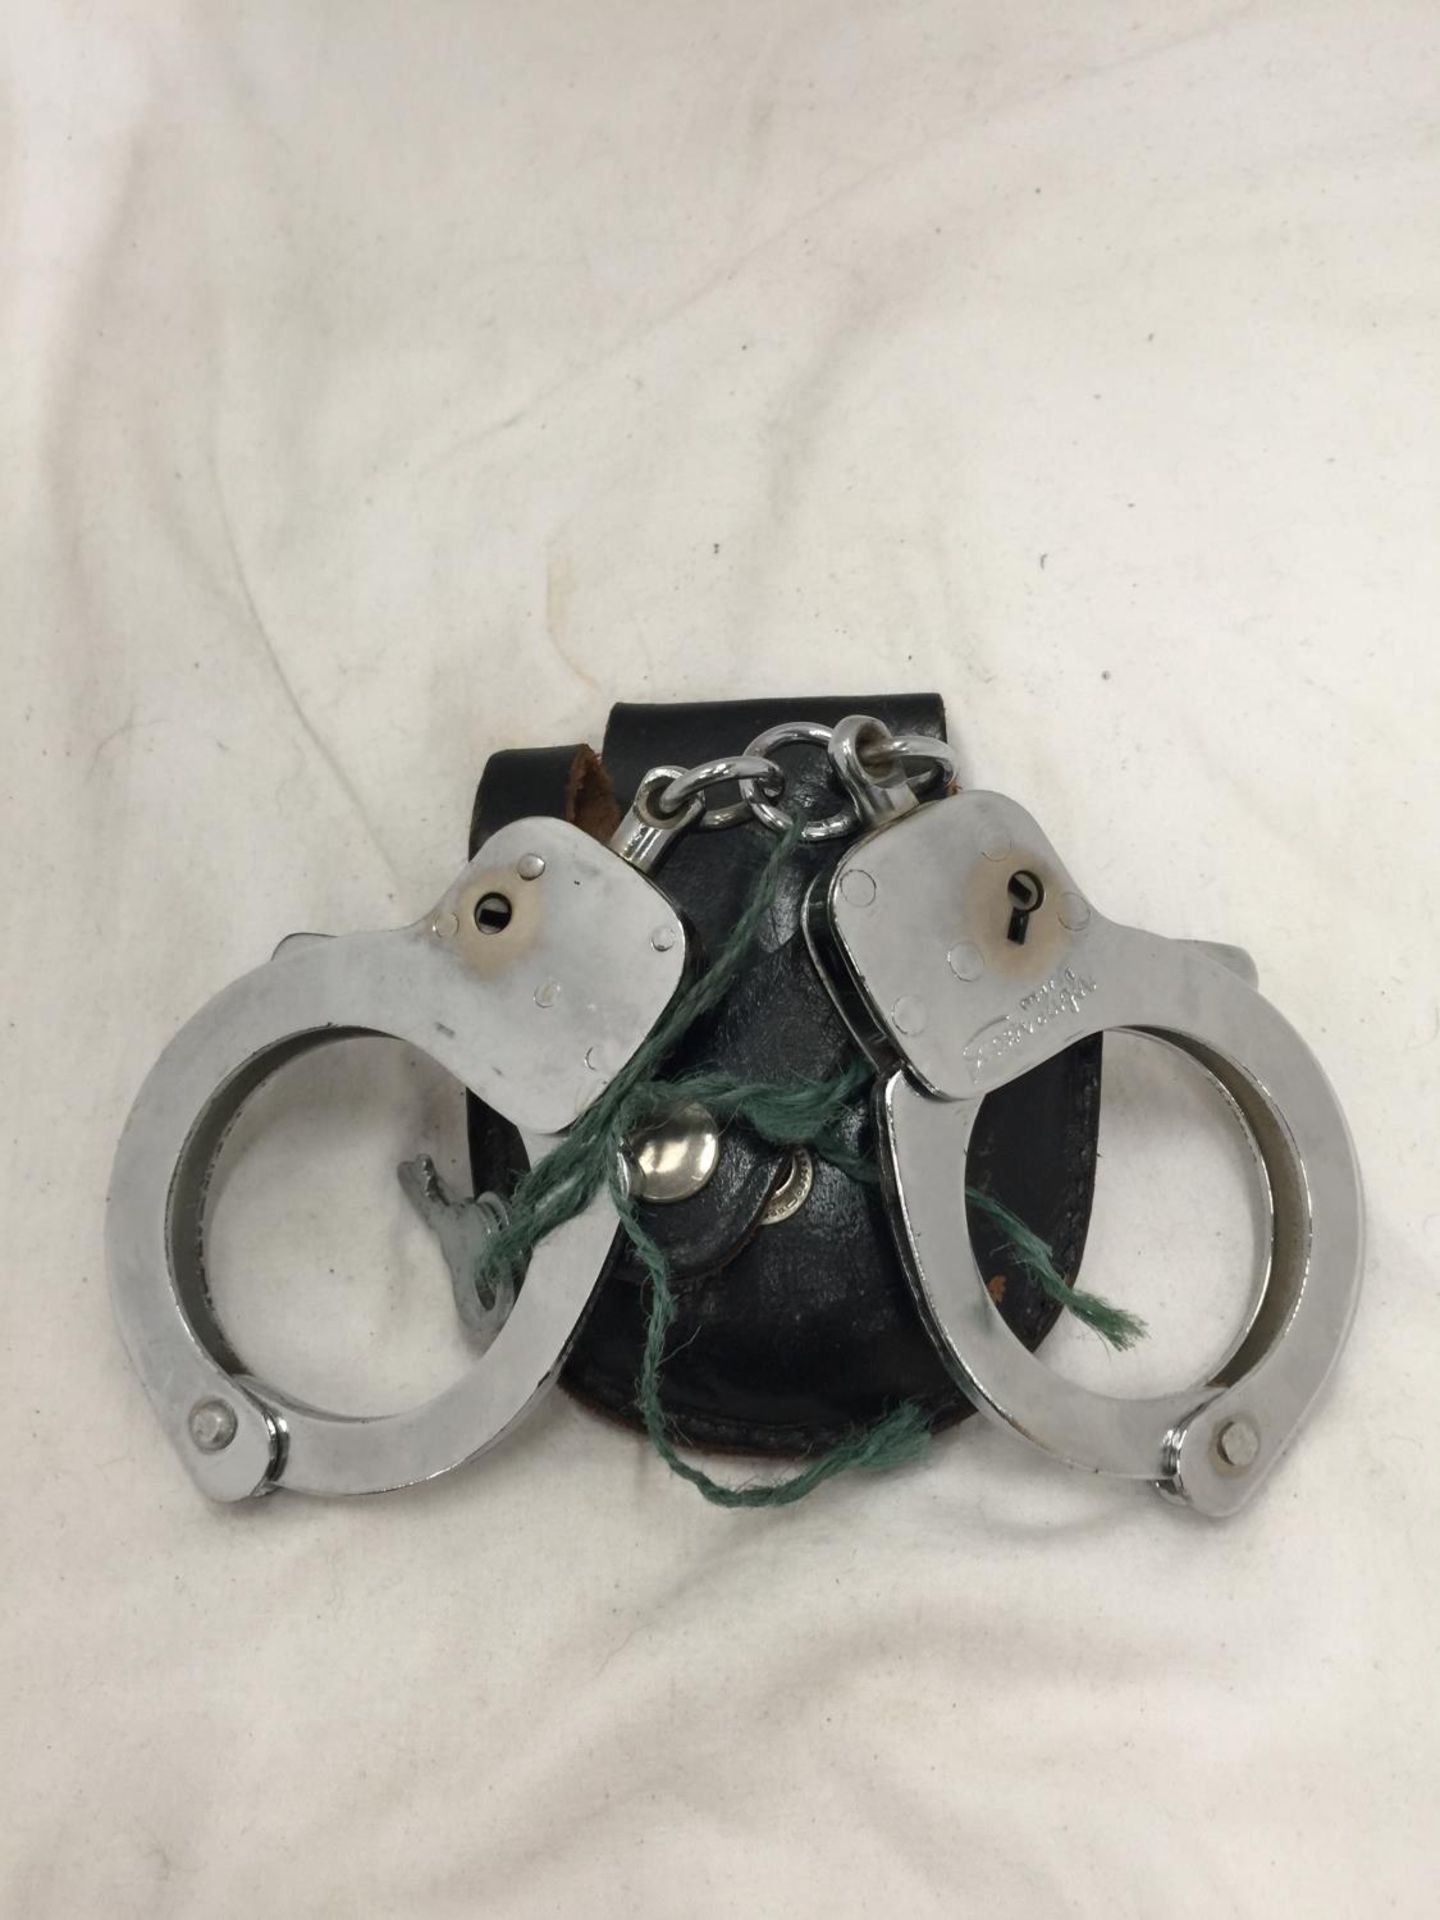 A PAIR OF HANDCUFFS WITH KEY IN A LEATHER POUCH - Image 5 of 6